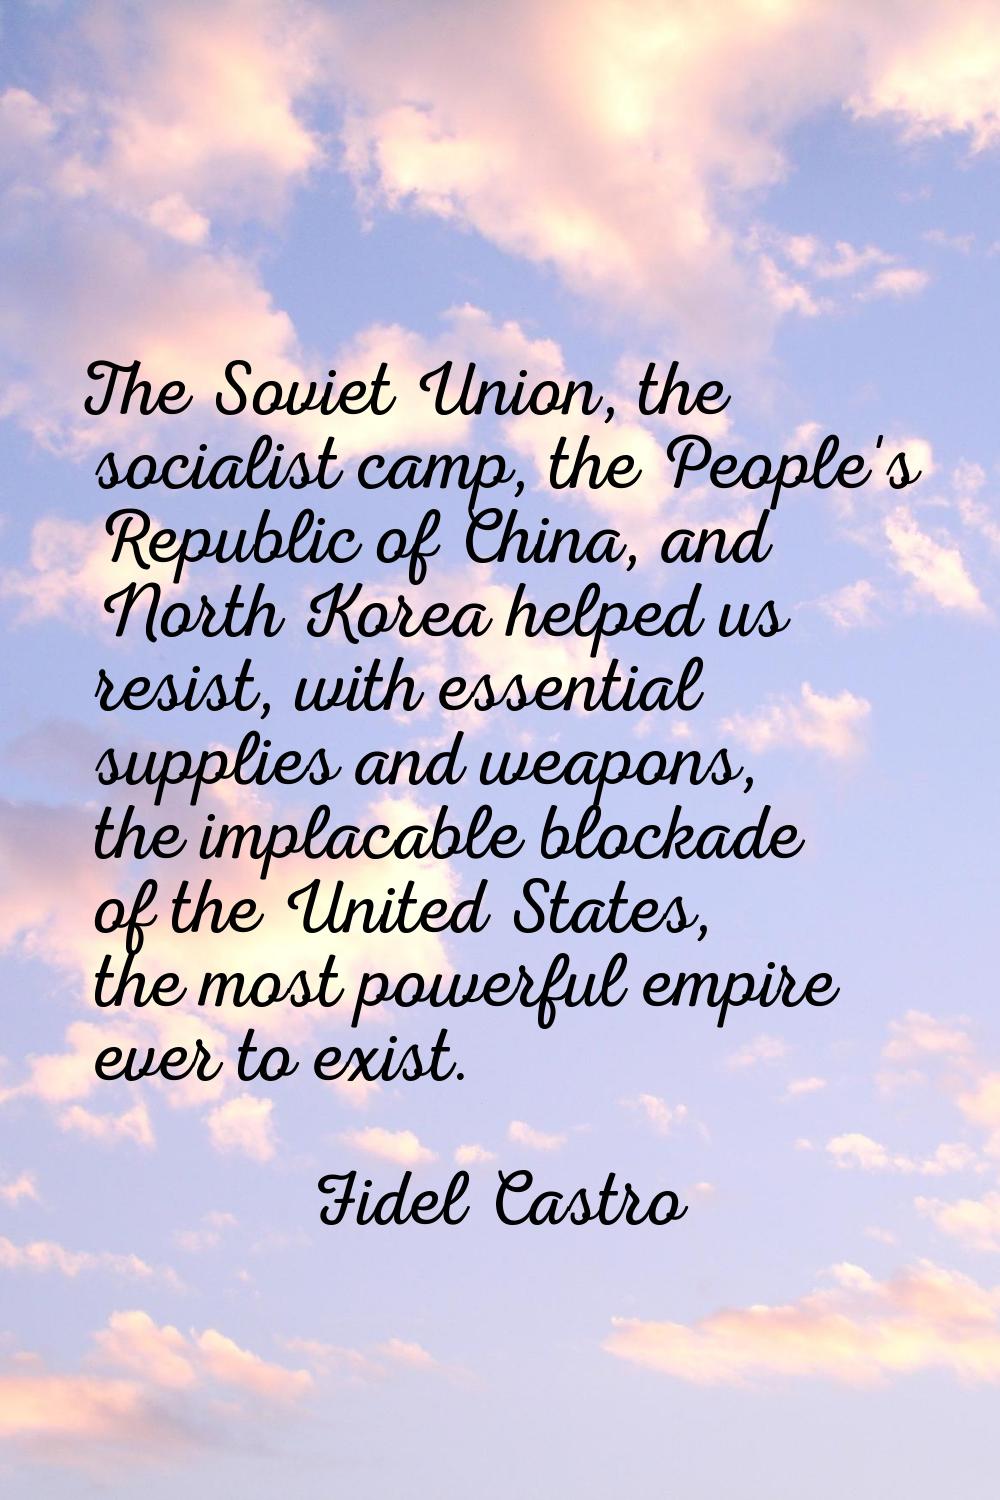 The Soviet Union, the socialist camp, the People's Republic of China, and North Korea helped us res